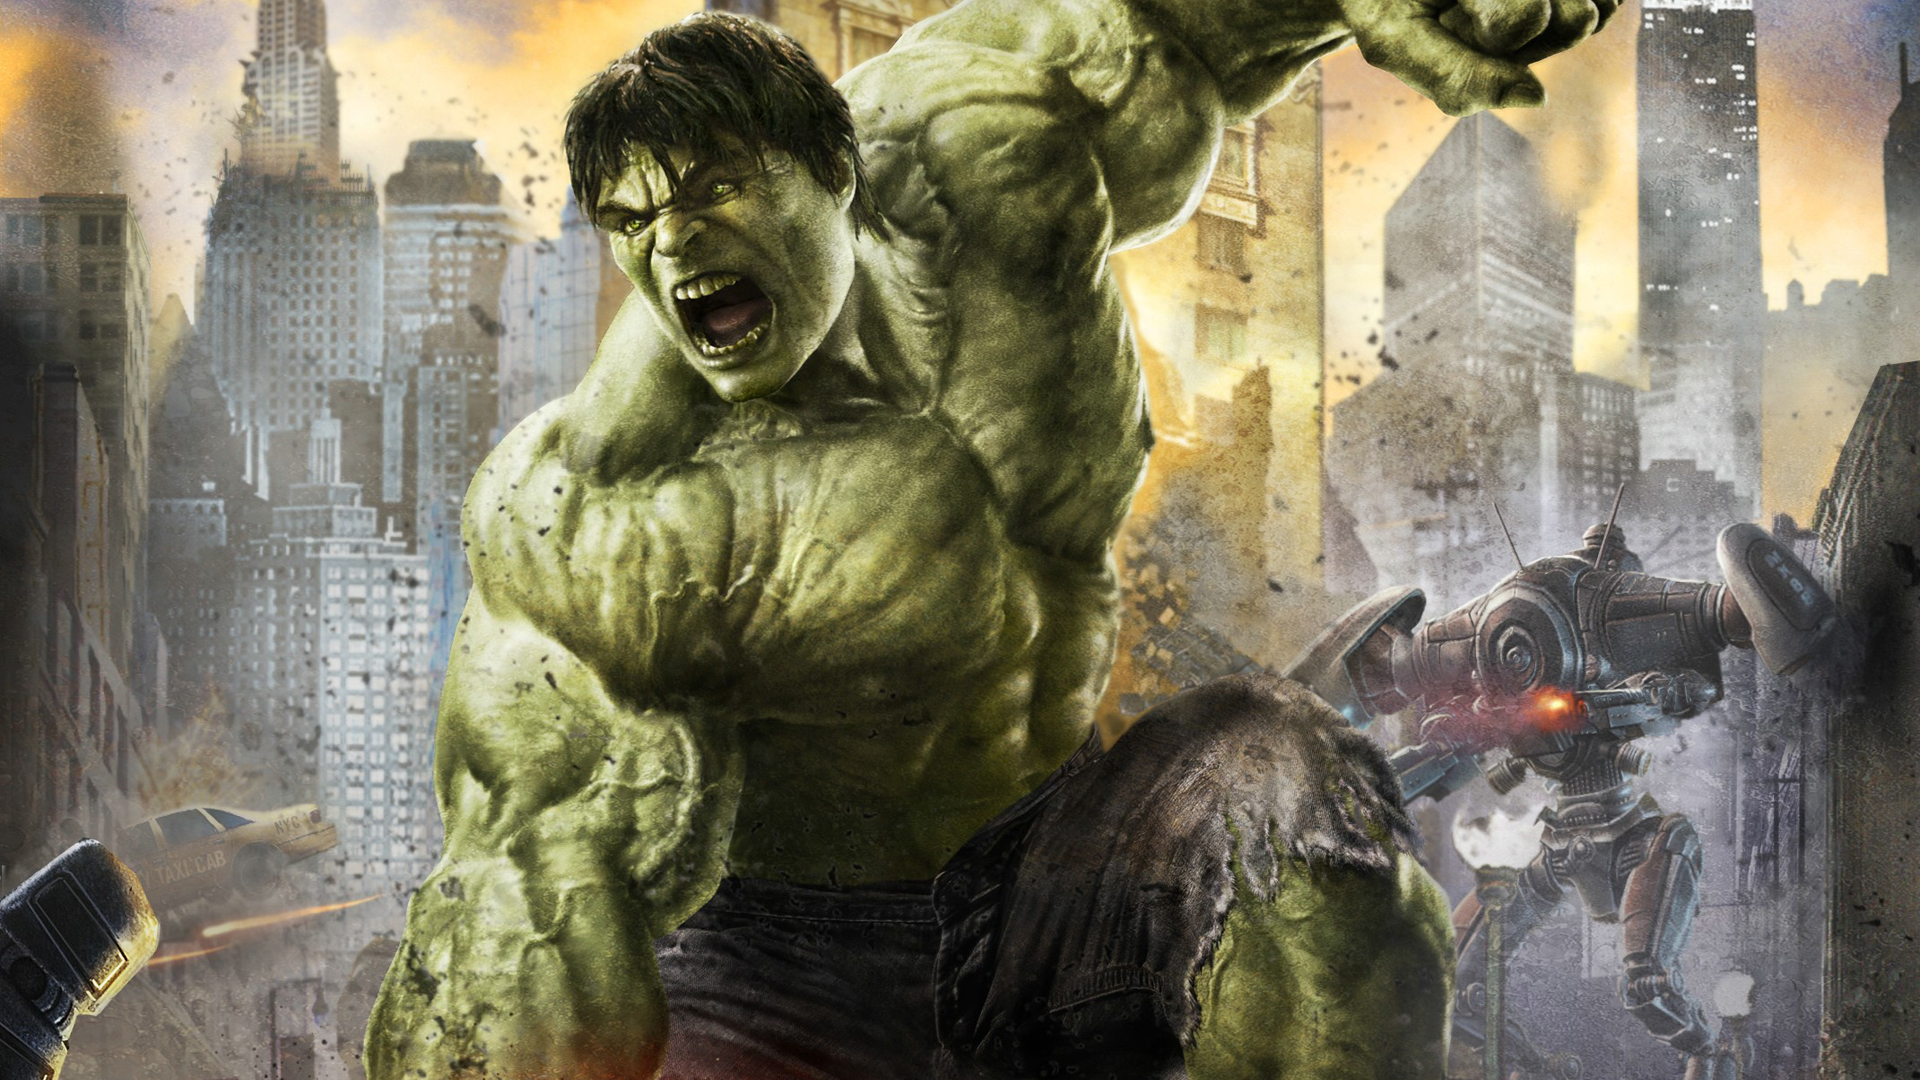 Hq Definition The Incredible Hulk Background Image For